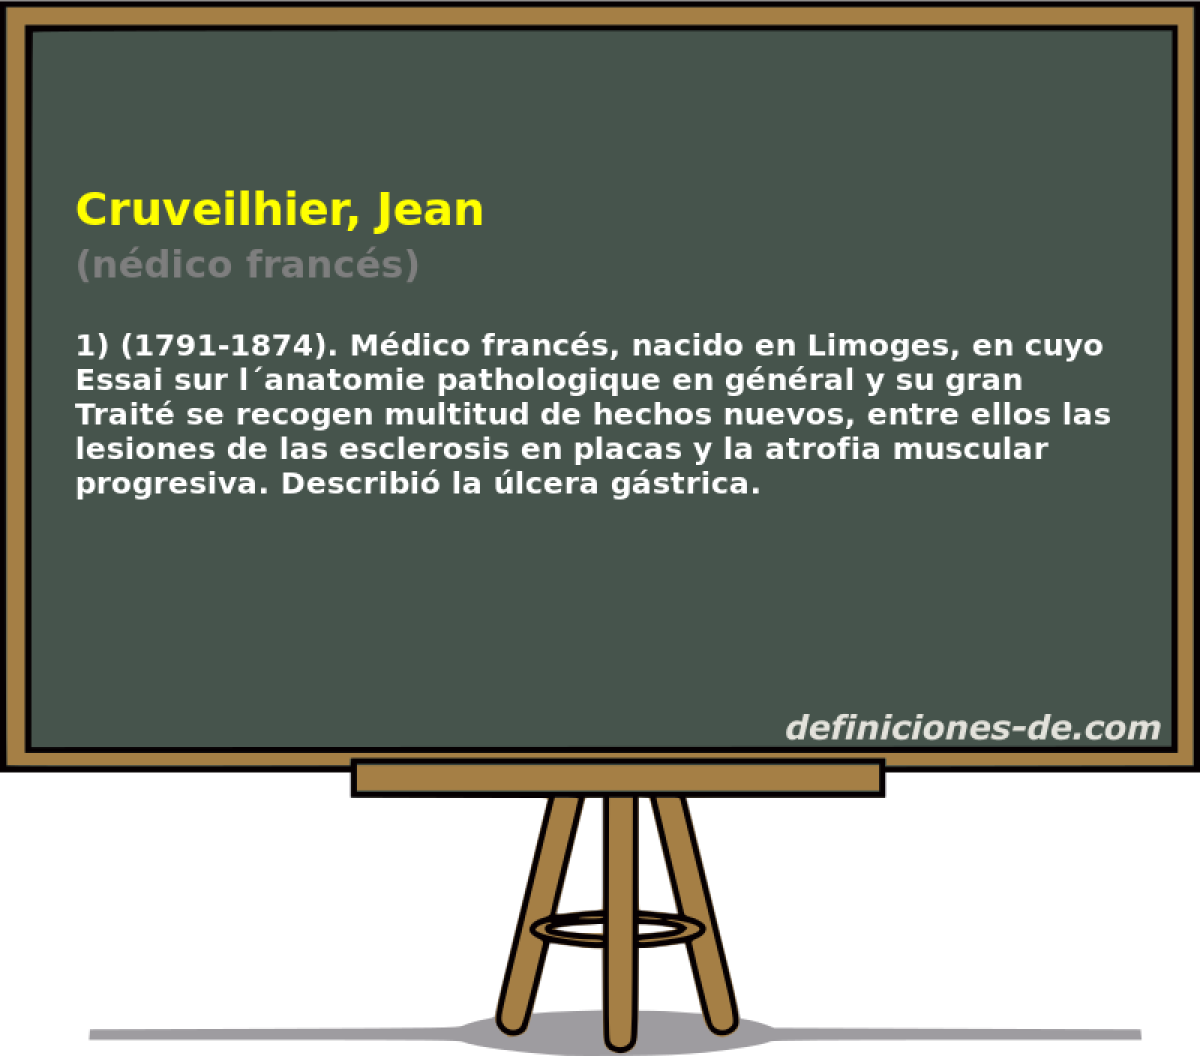 Cruveilhier, Jean (ndico francs)